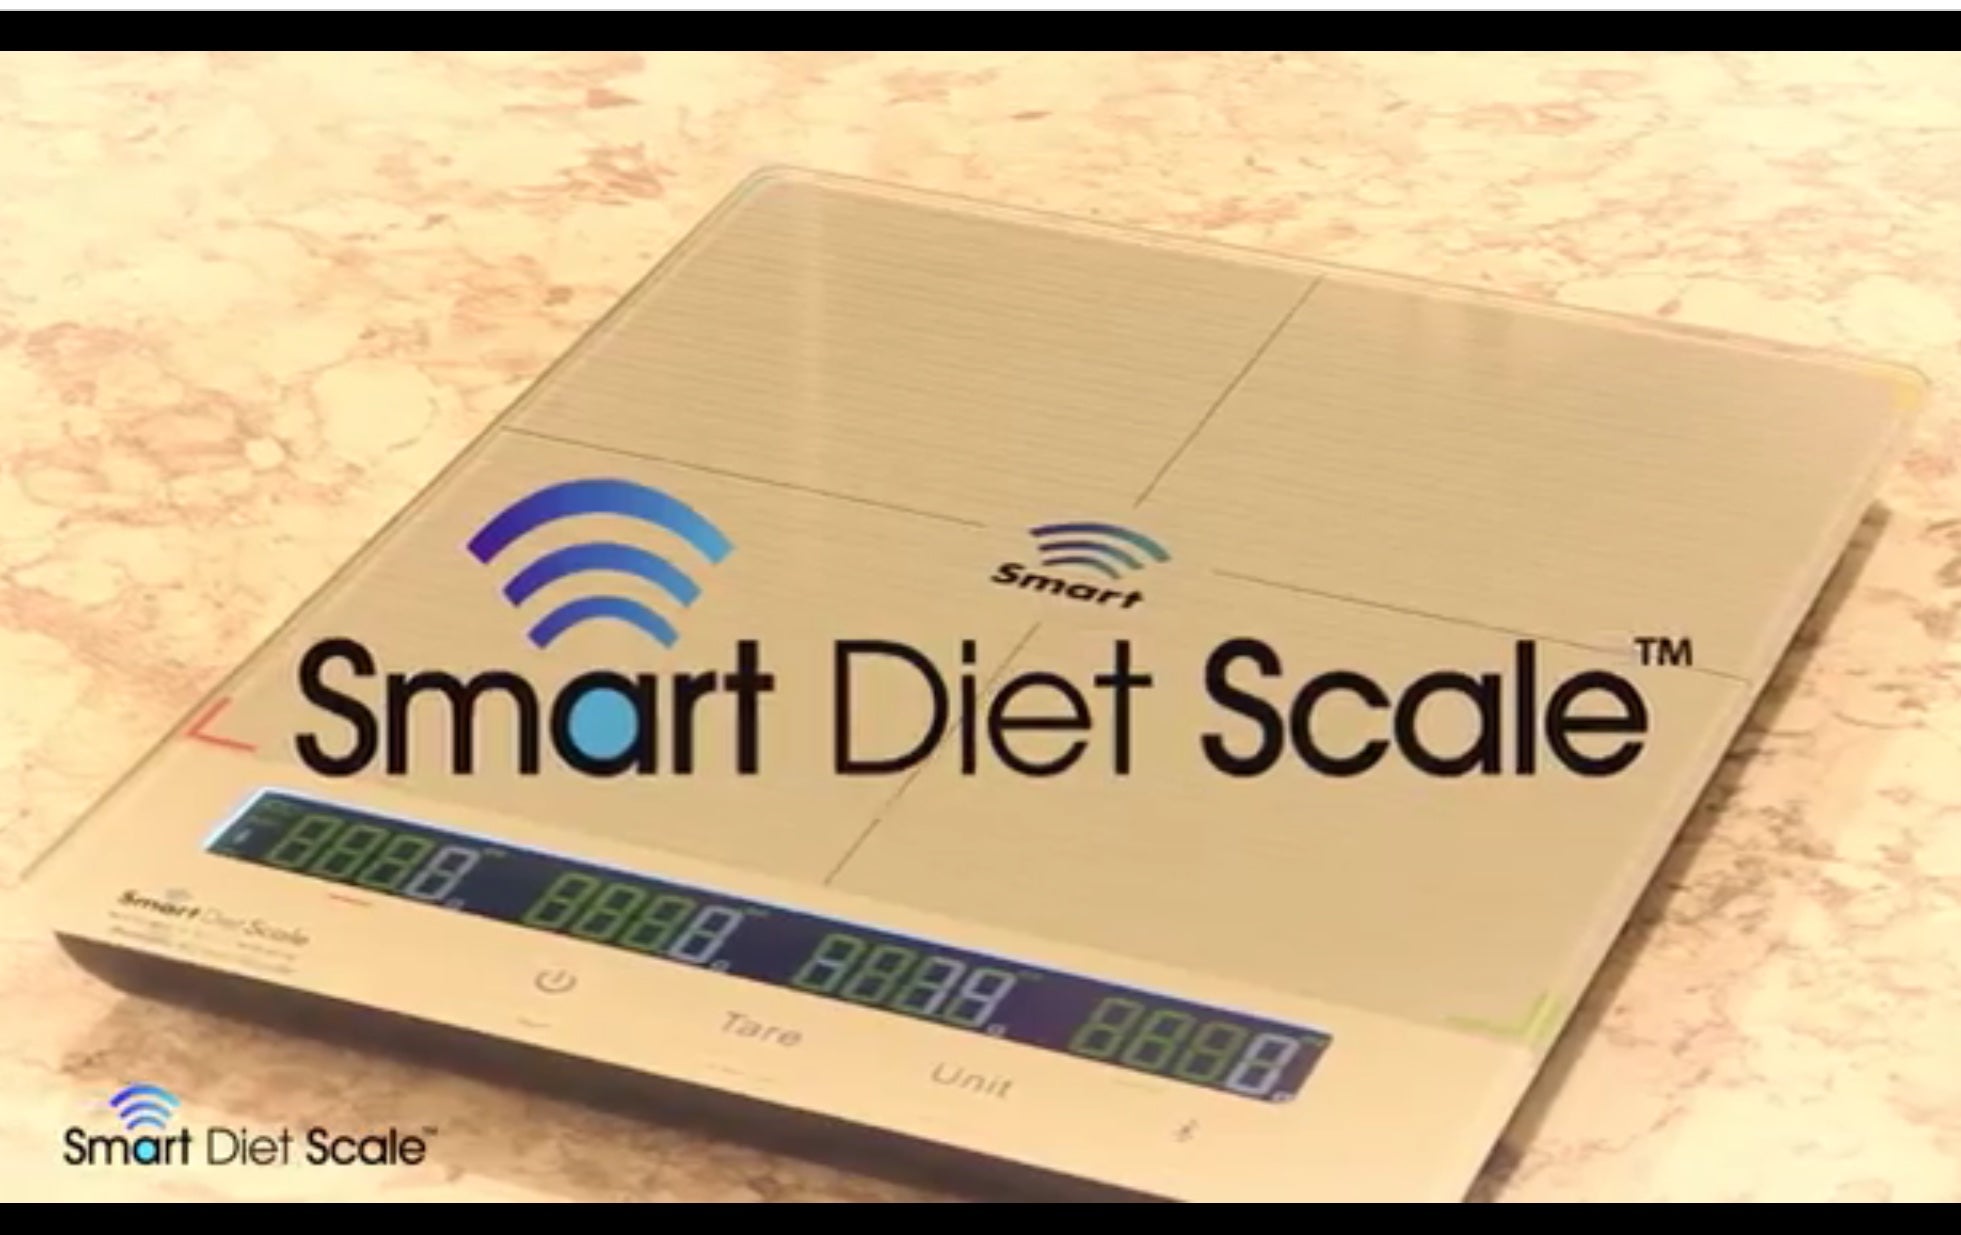 Powerology Smart Food & Nutrition Scale Compatible with iOS & Android App -  Handy Lifestyle Diet Com